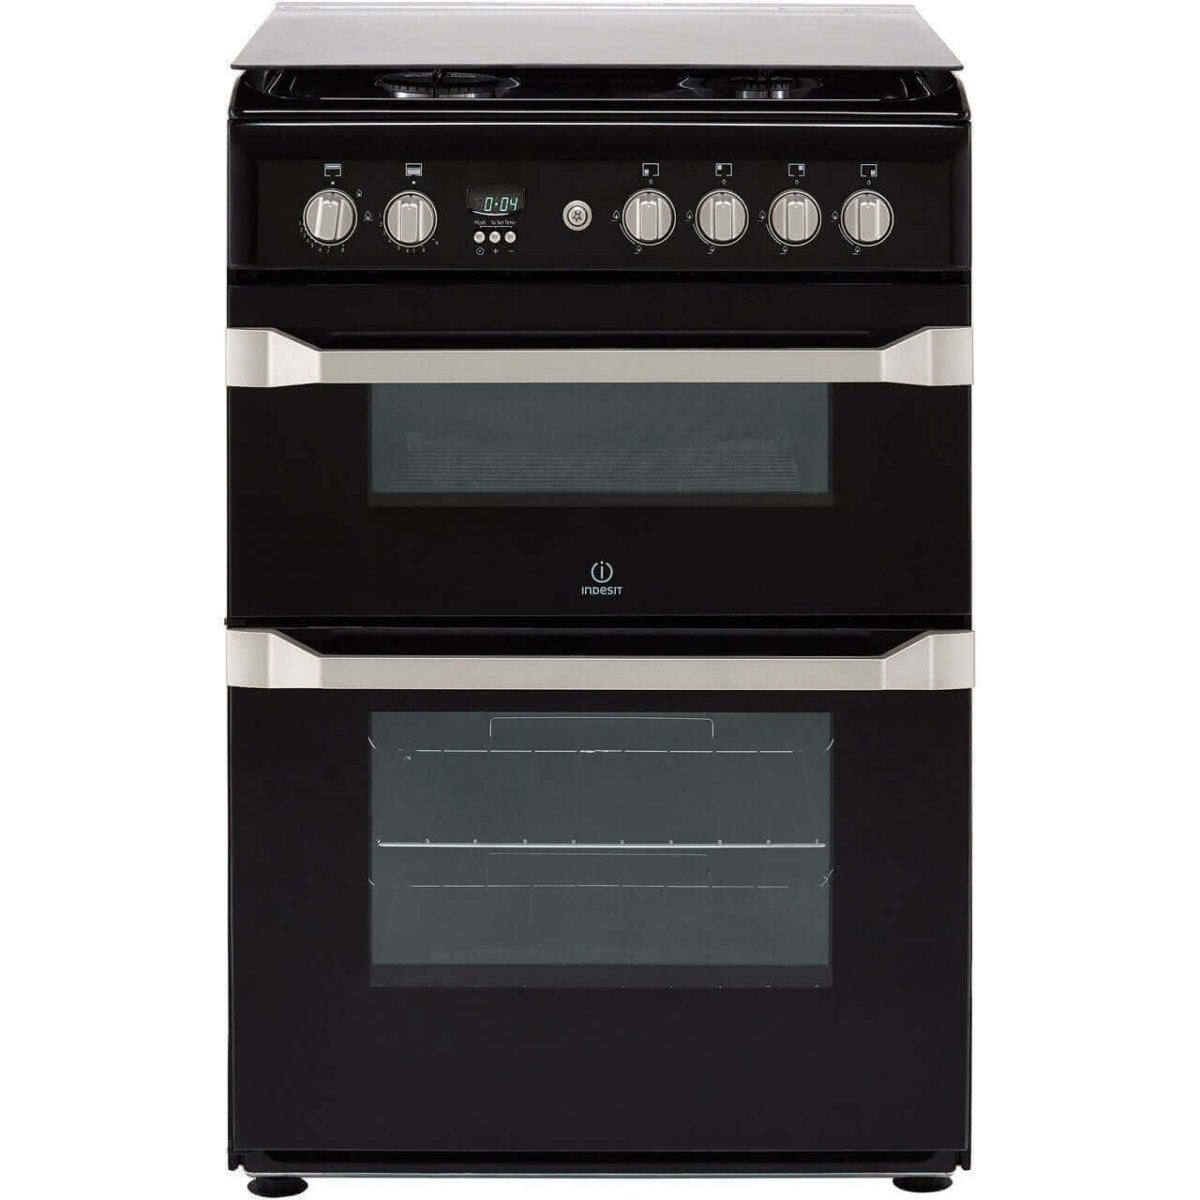 Indesit Advance ID60G2K Gas Cooker - Black - A Rated - Atlantic Electrics